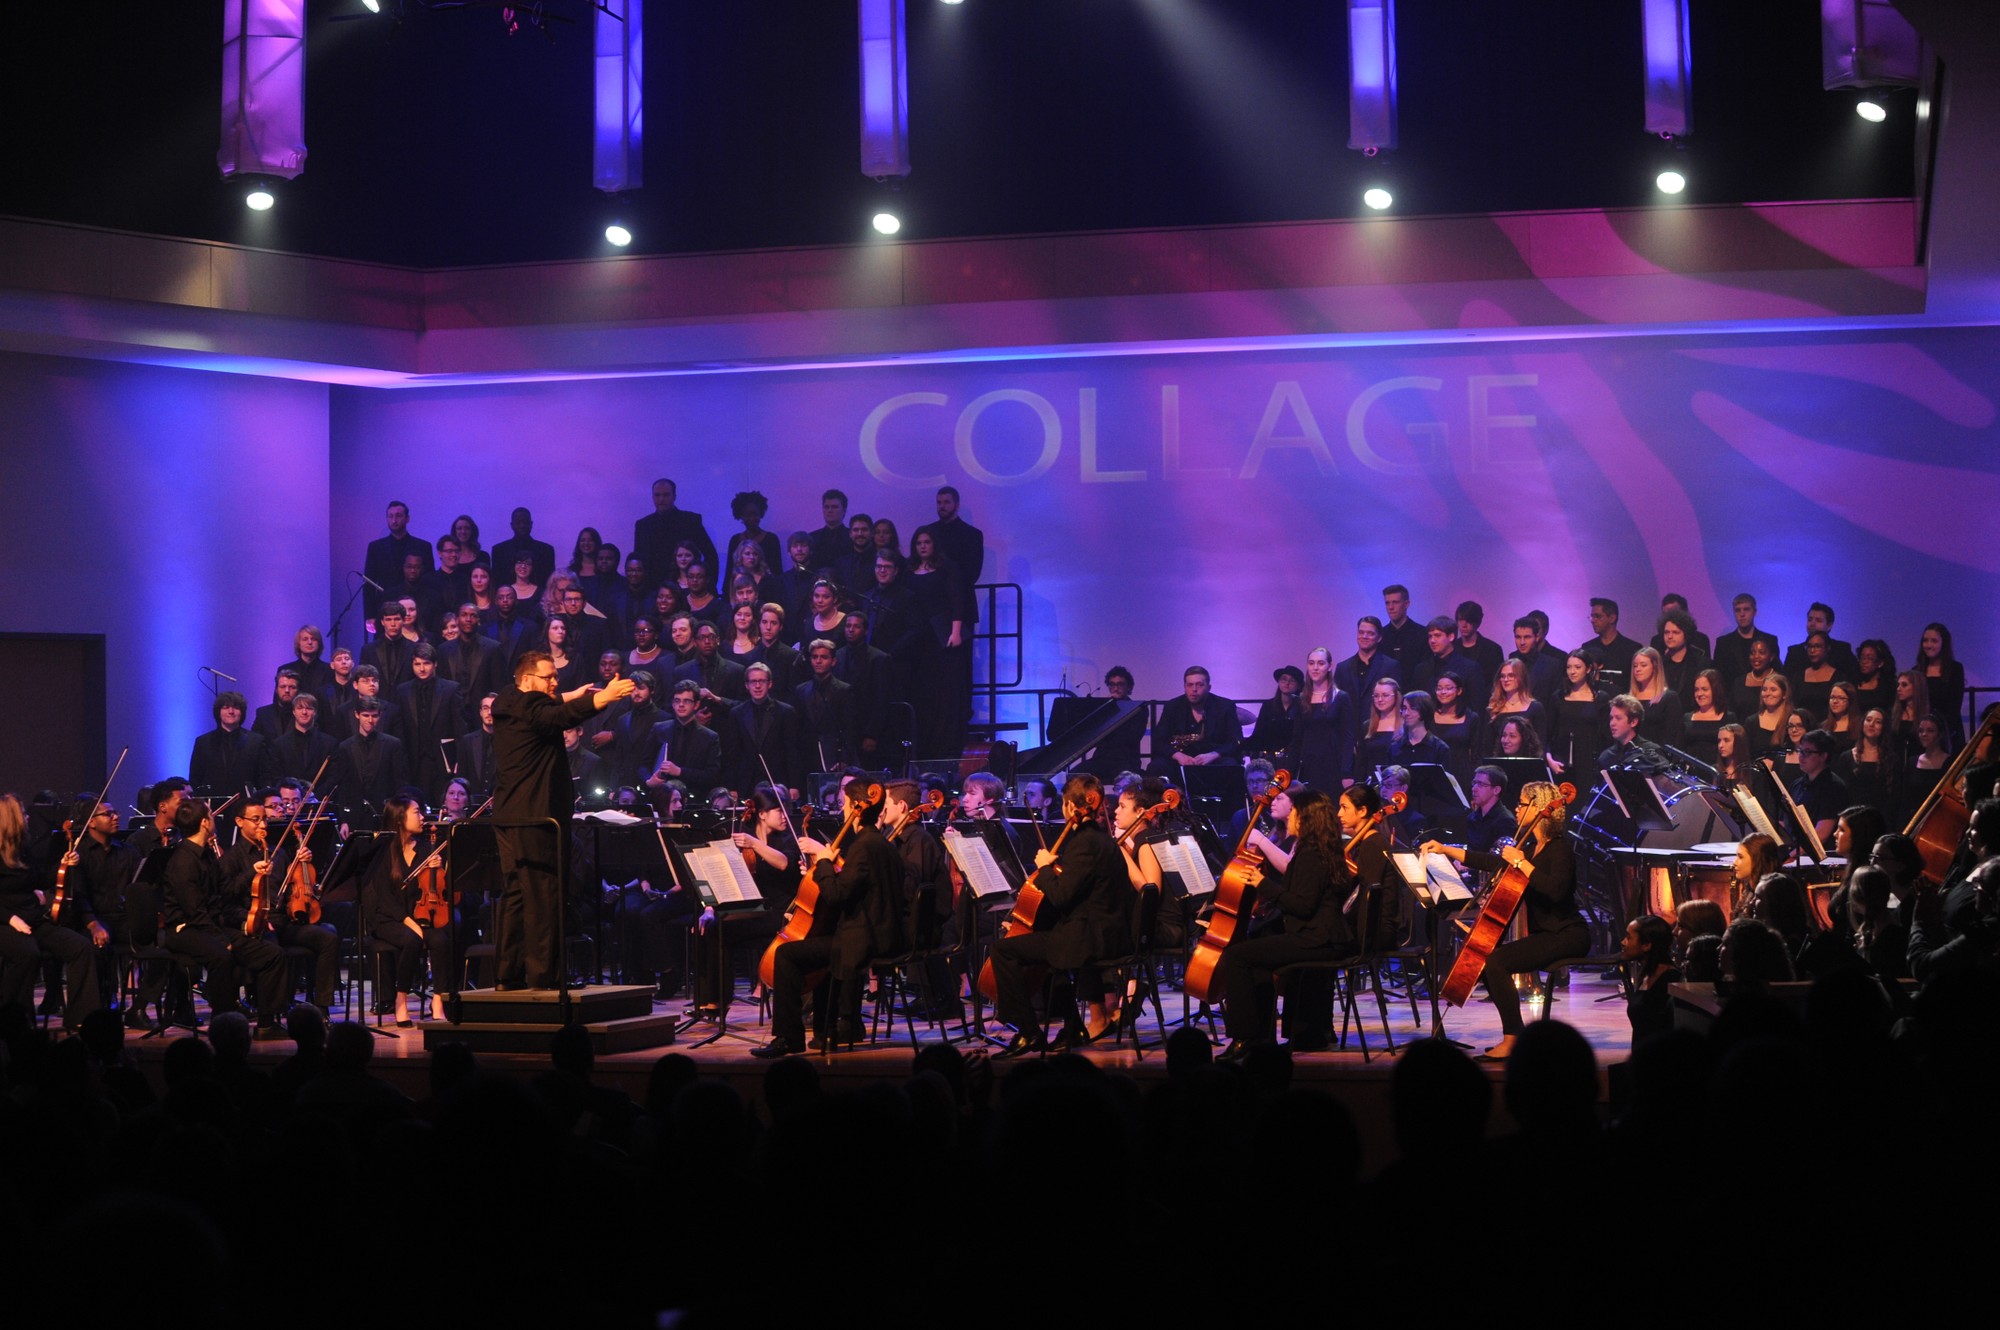 ‘Collage Concert’ raises money for music students